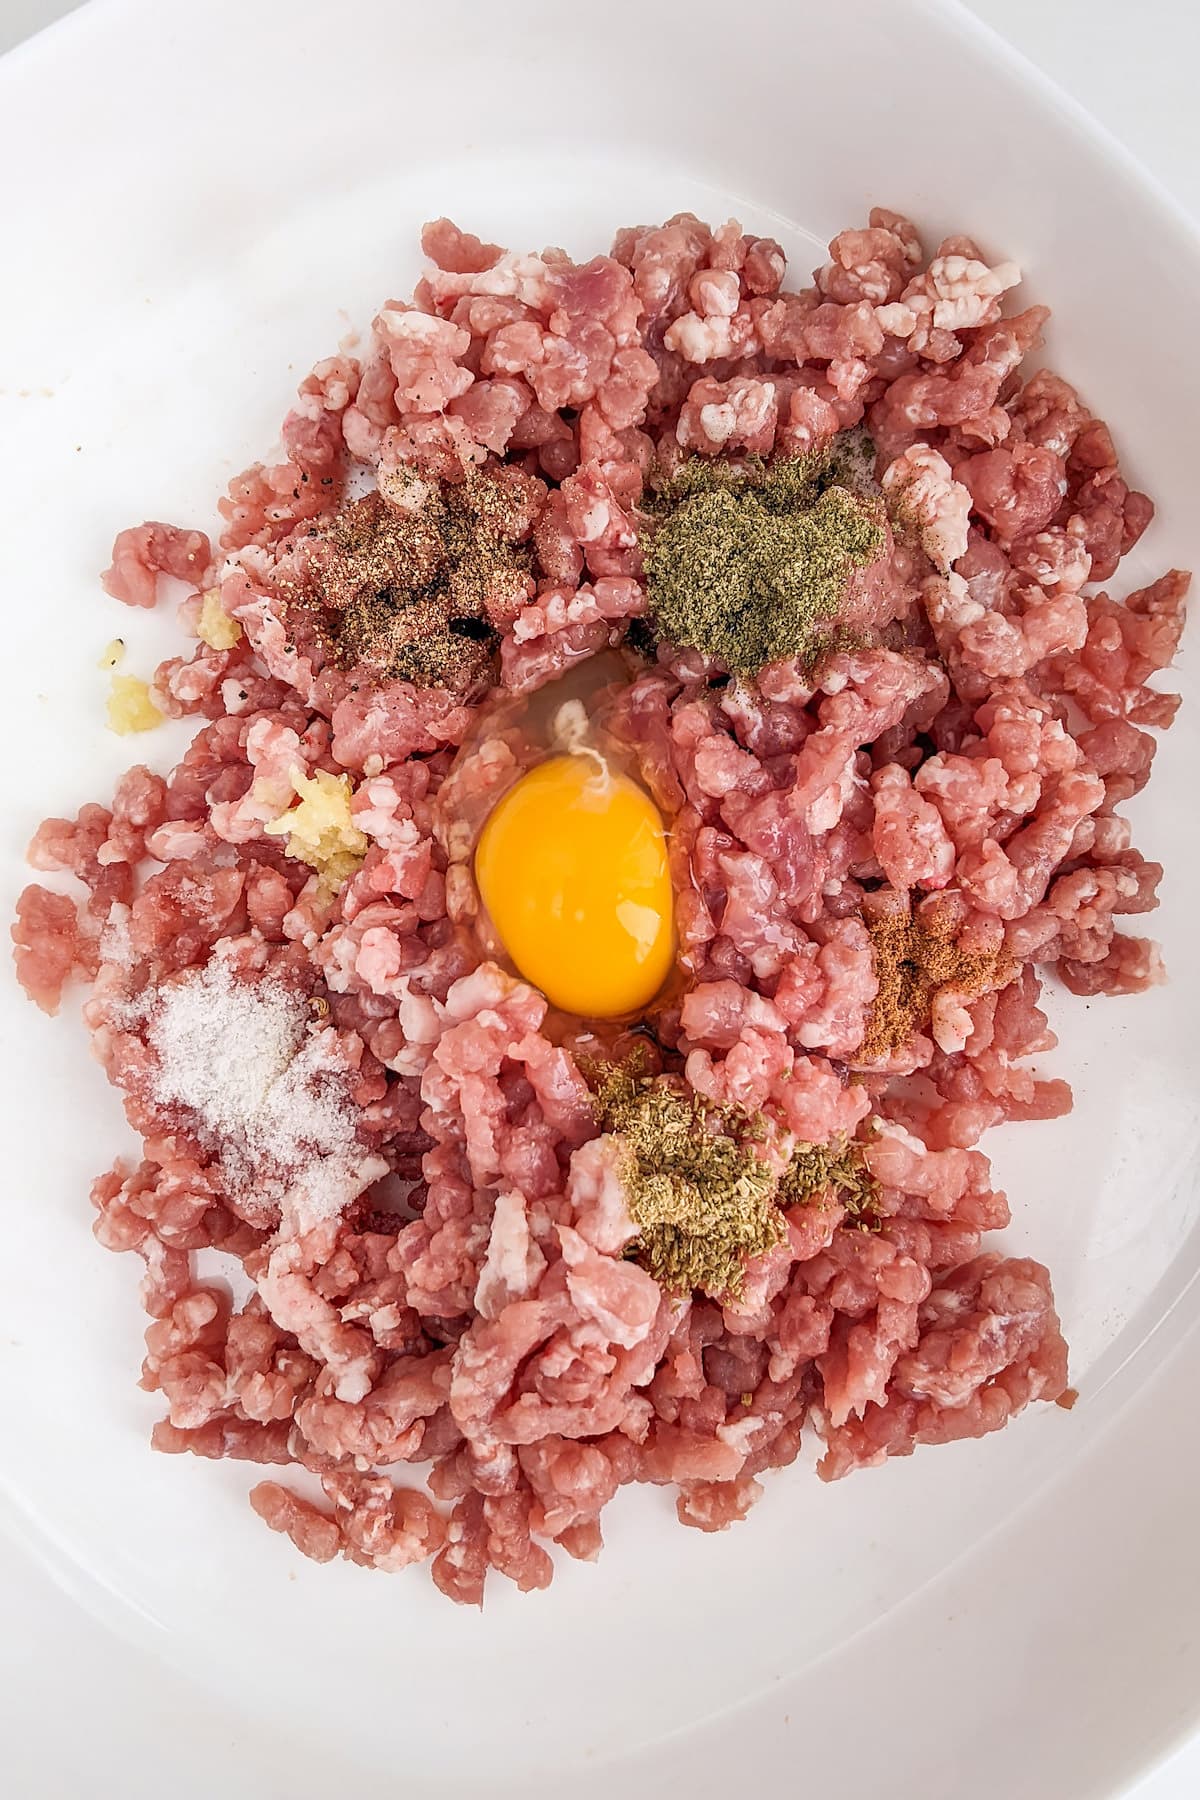 Ground meat pork with one raw egg, and spices in a white big plate.